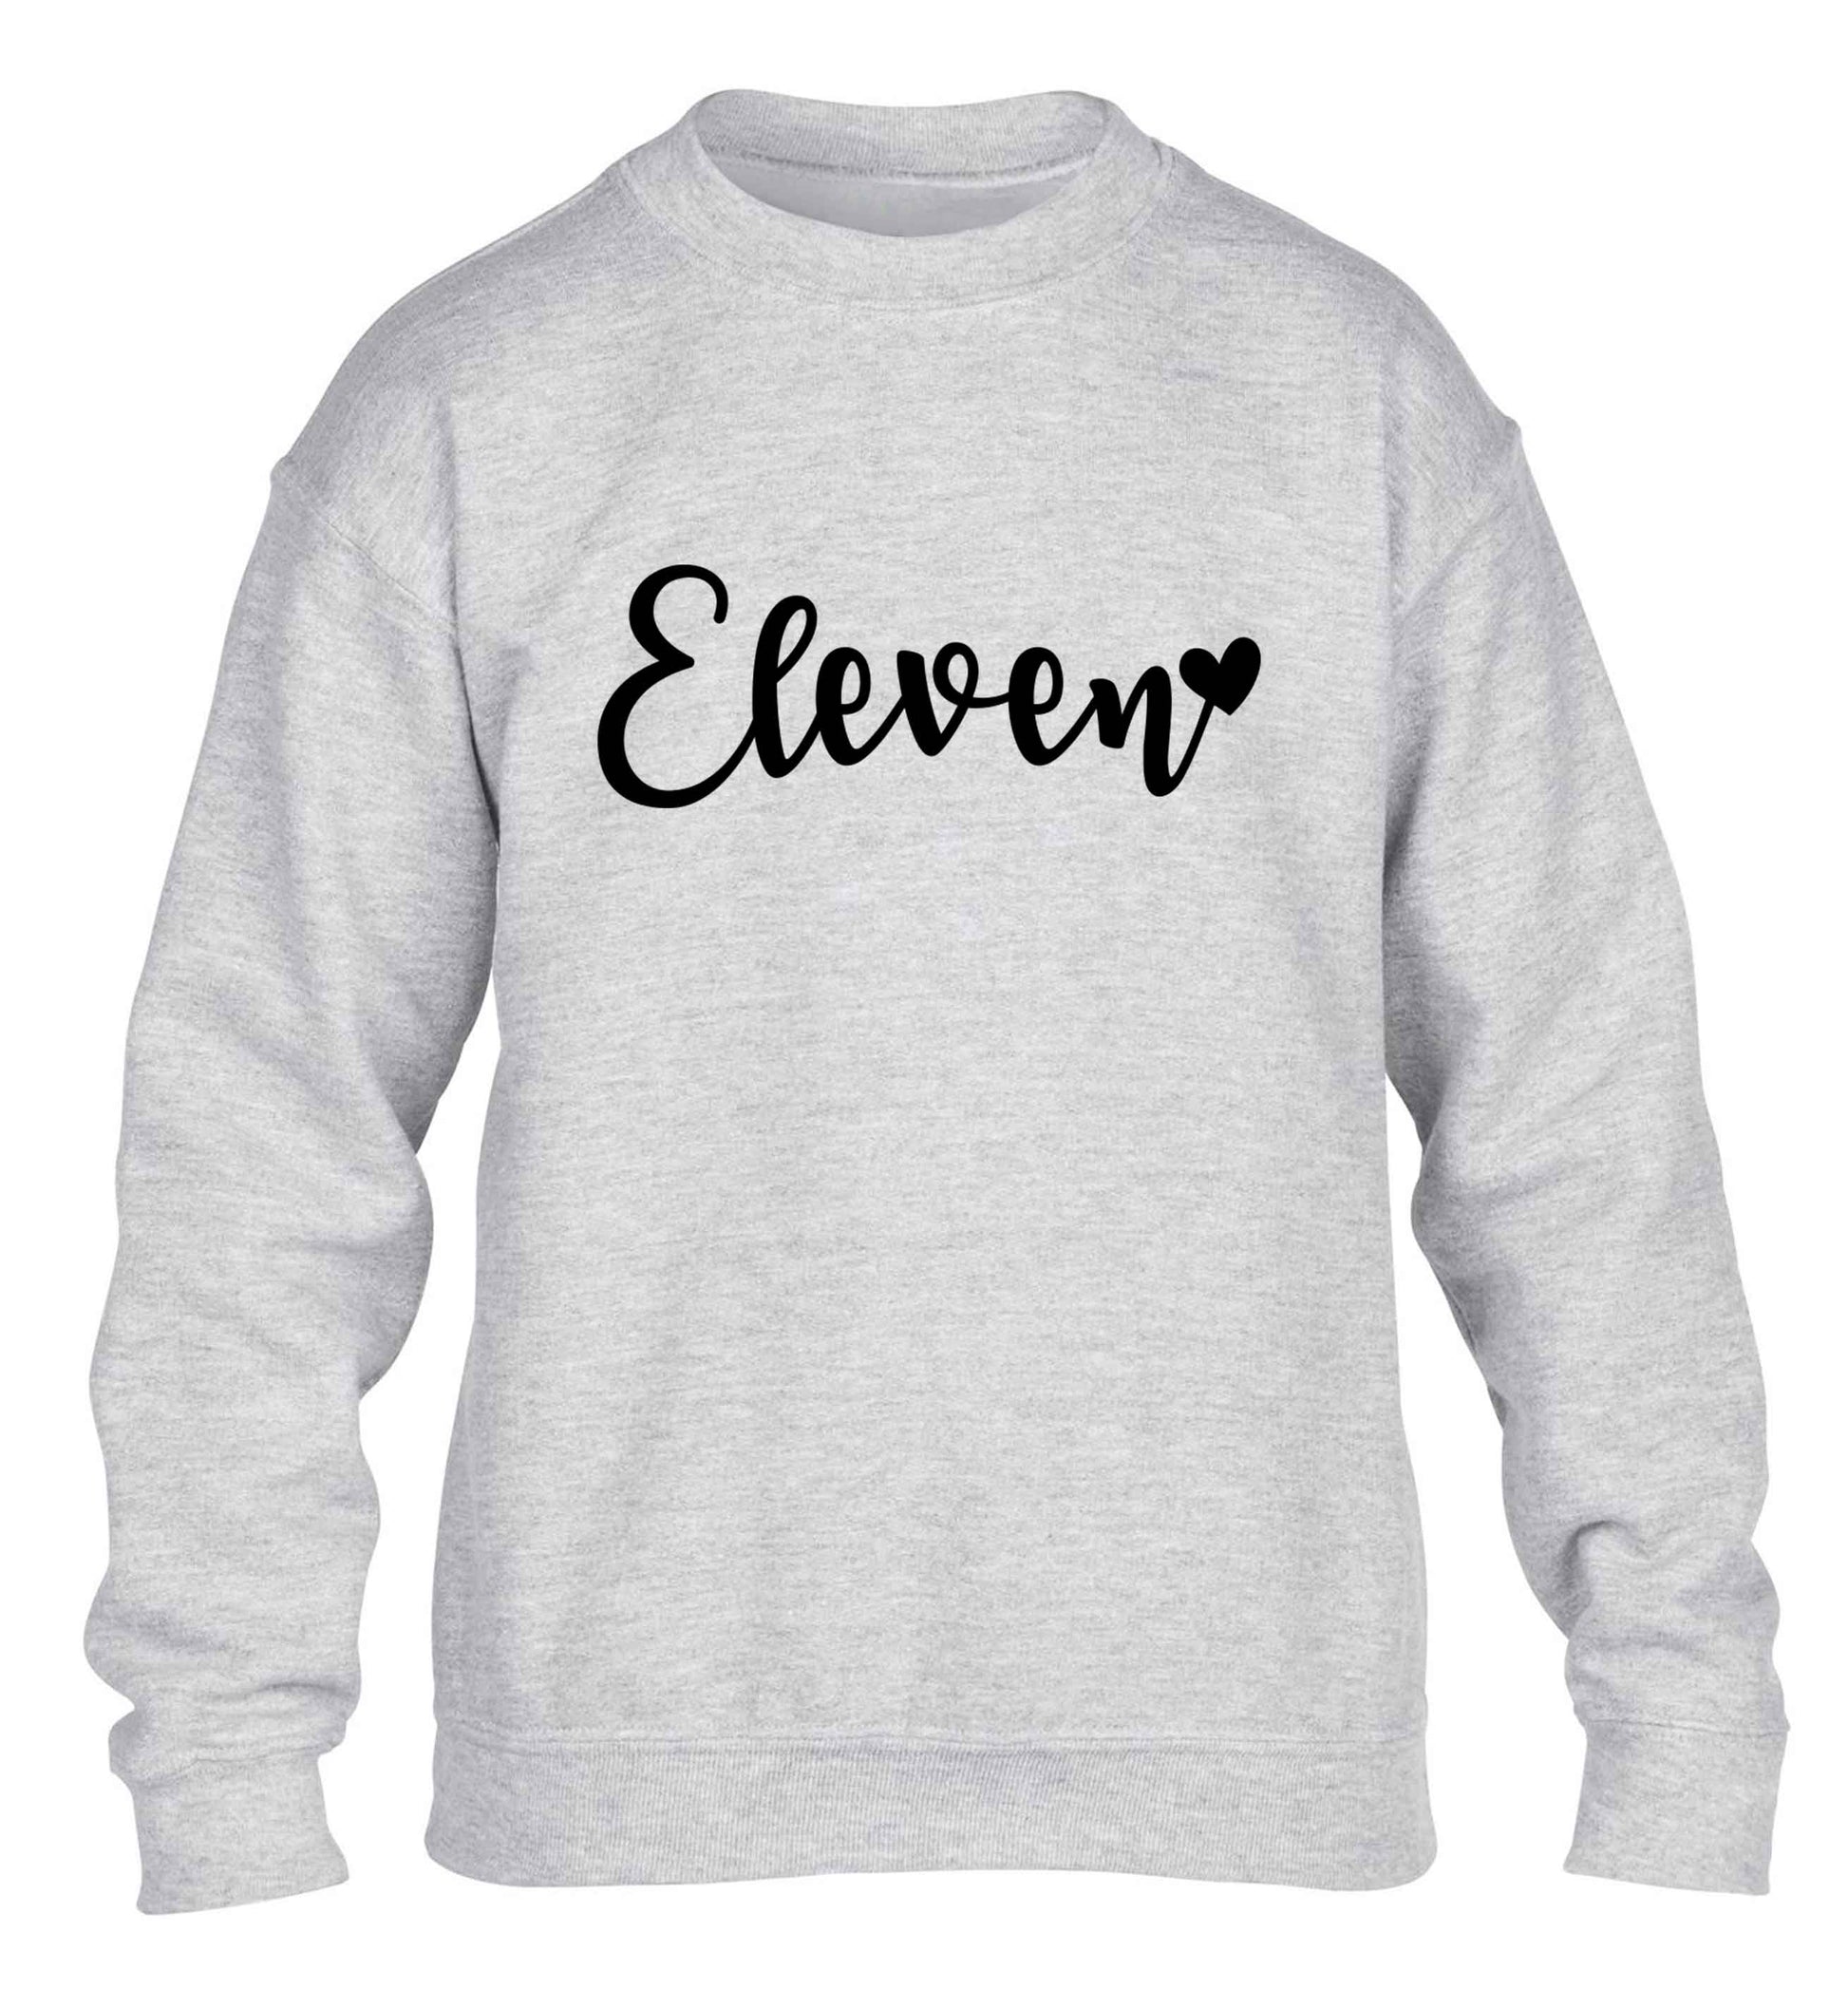 Eleven and heart! children's grey sweater 12-13 Years